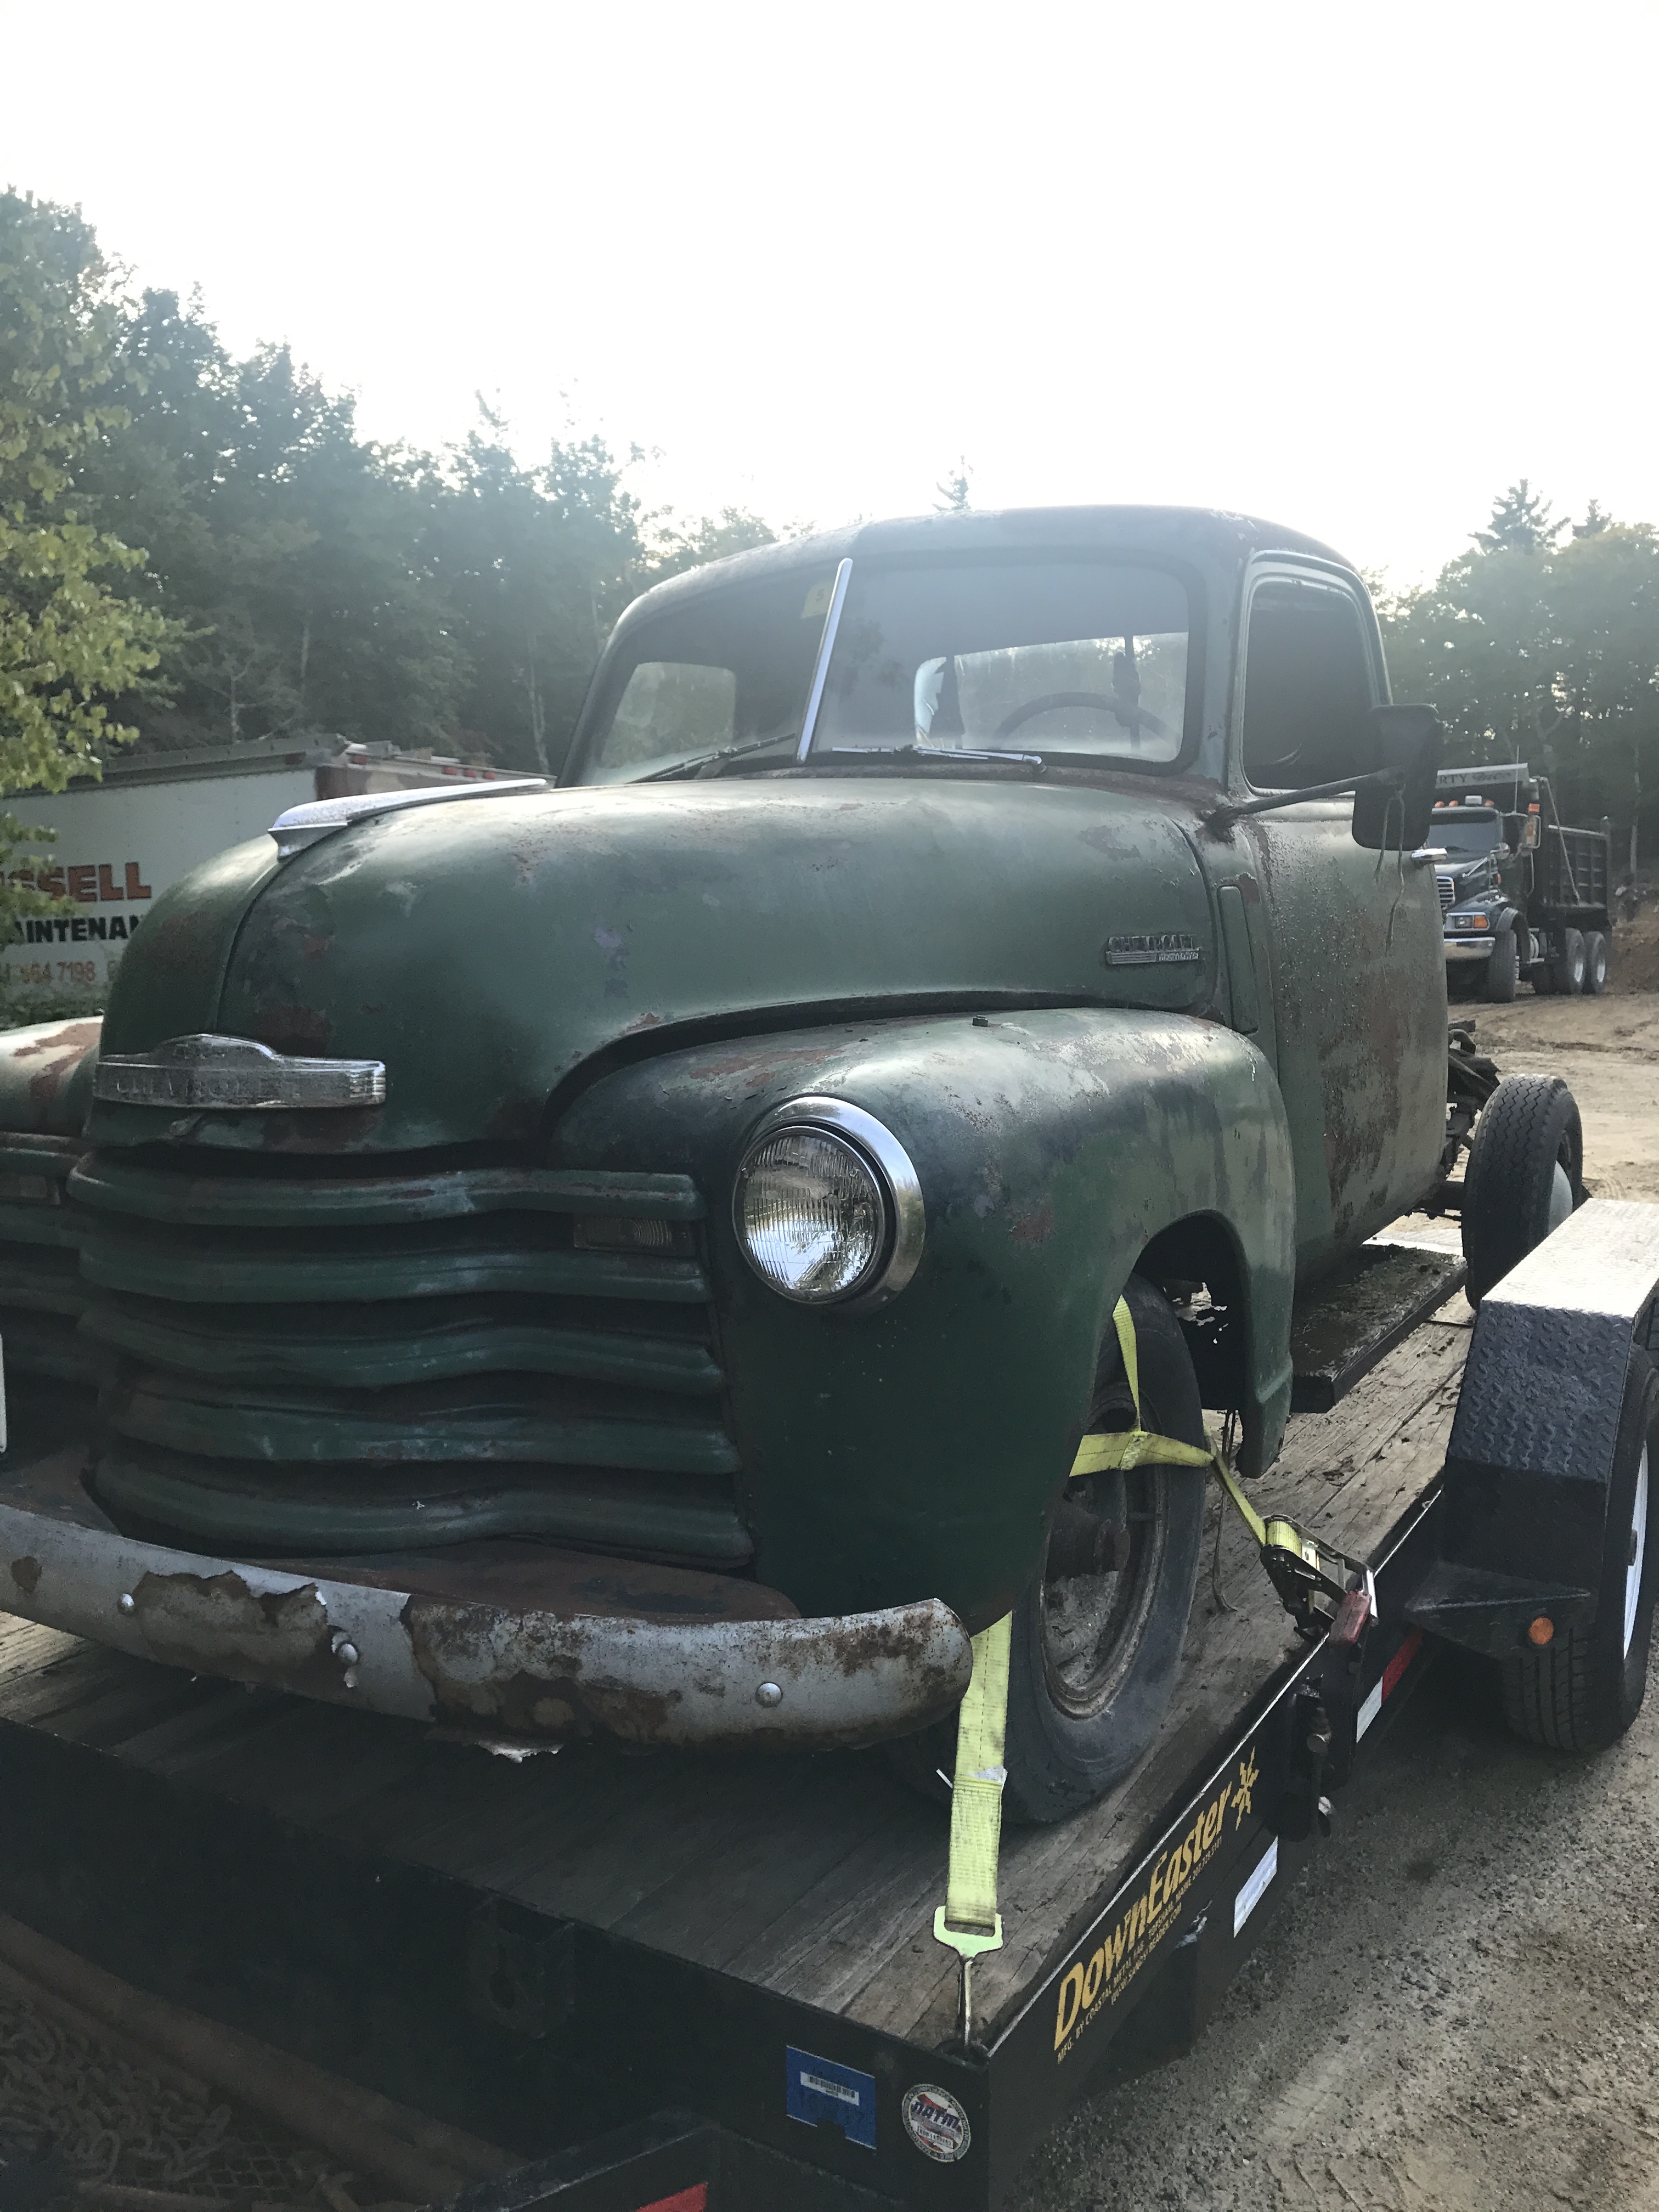 Teds Rods - Maine's outlaw hot rod shop